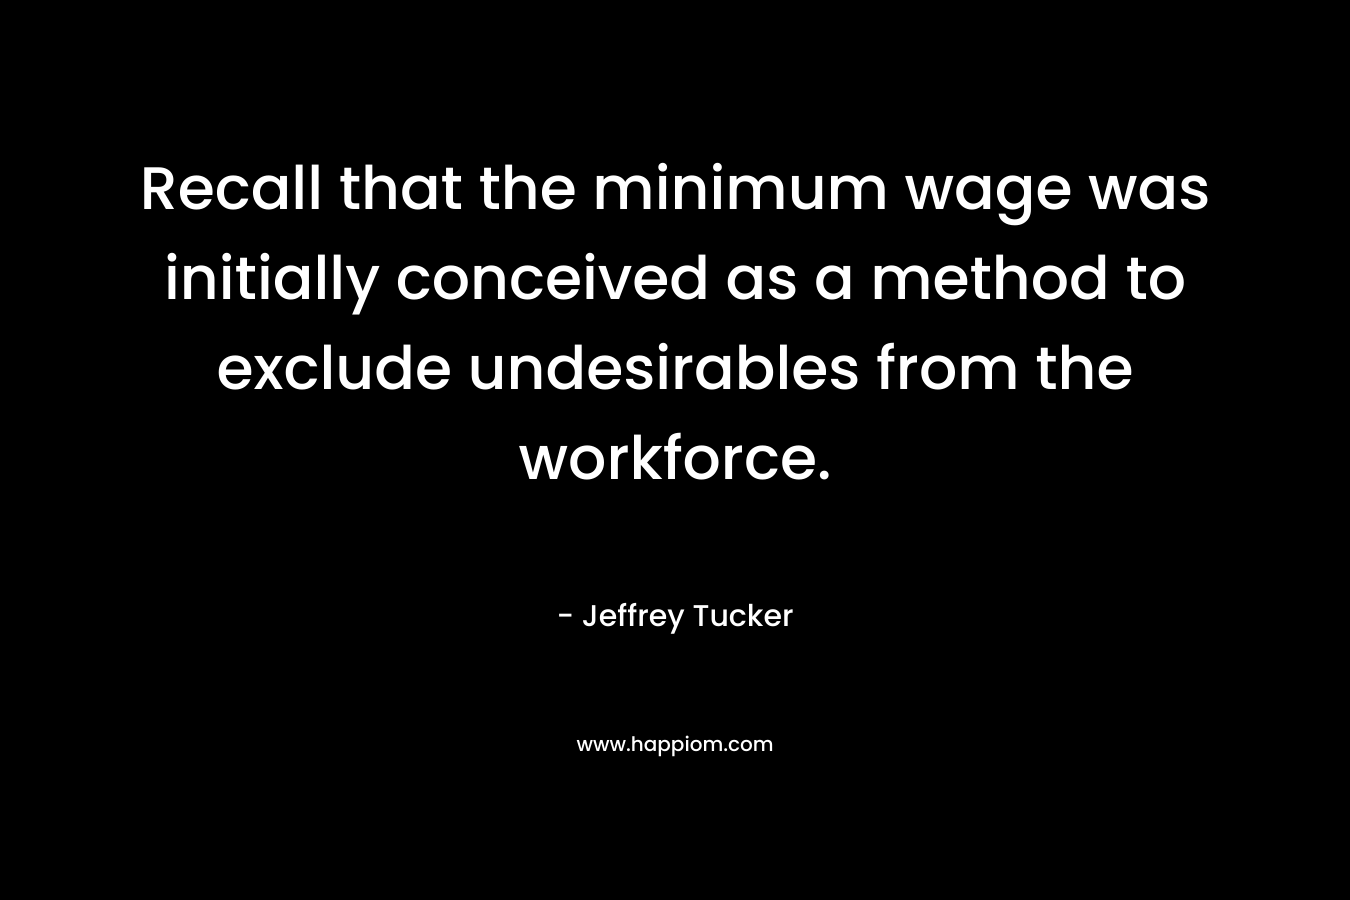 Recall that the minimum wage was initially conceived as a method to exclude undesirables from the workforce. – Jeffrey Tucker